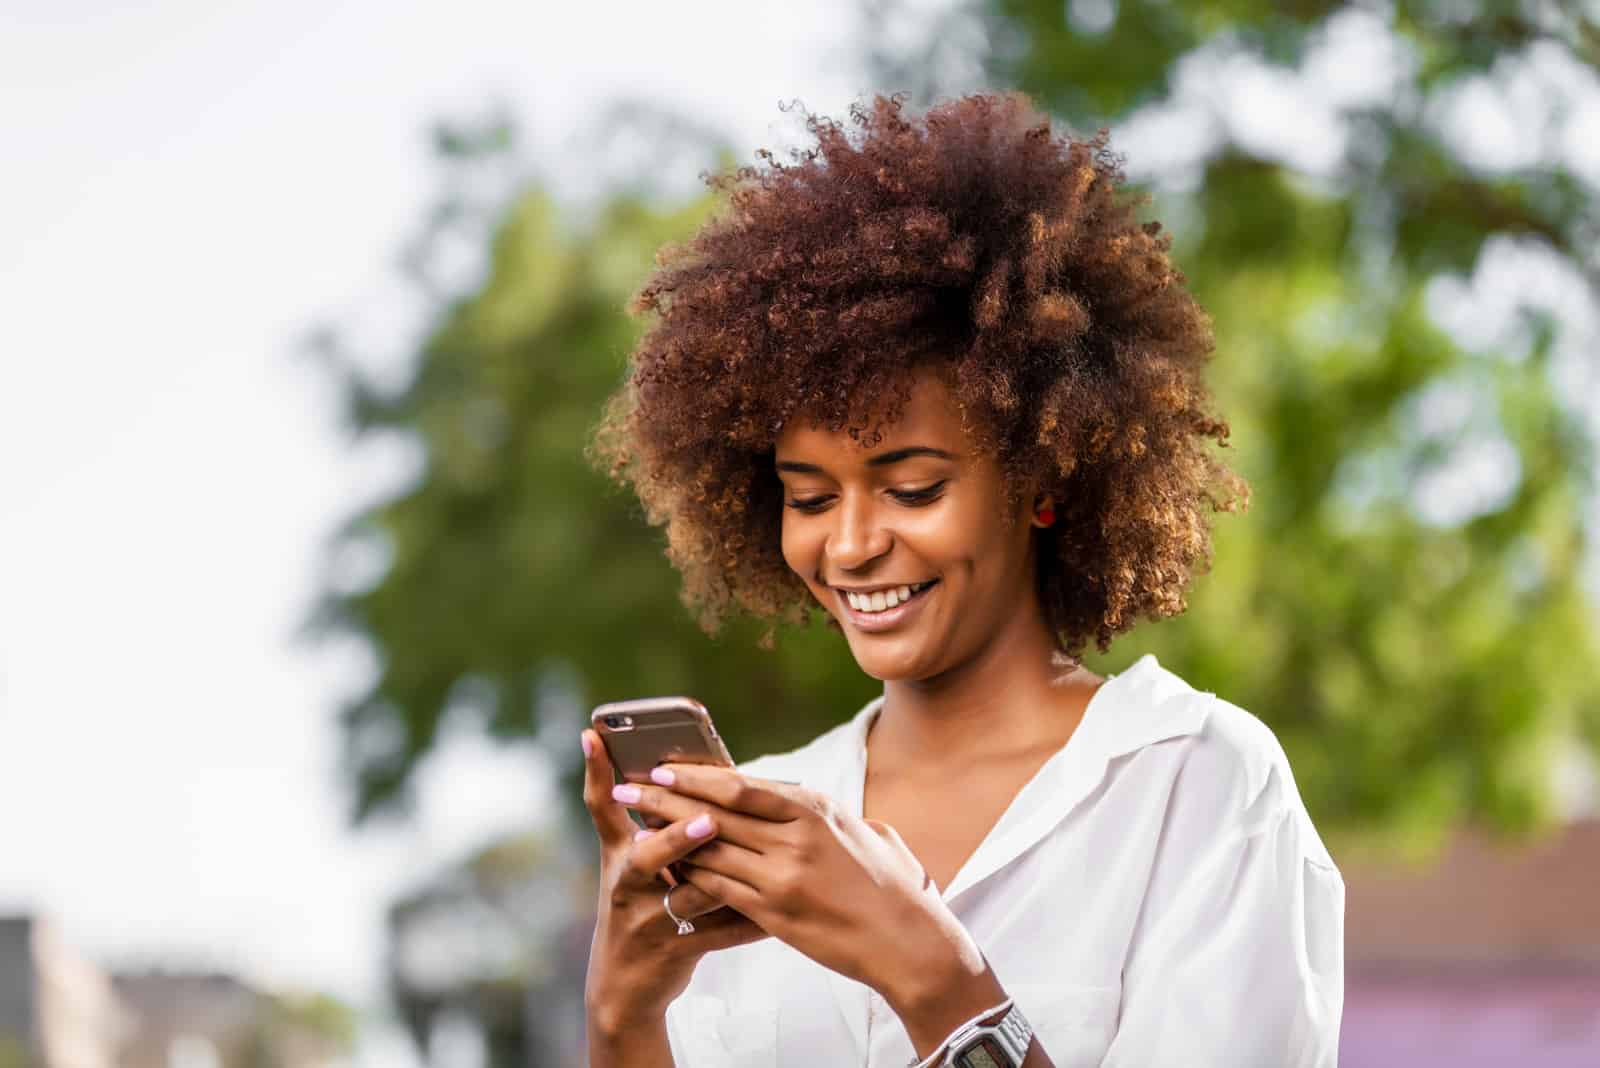 smiling woman with curly hair texting outdoor